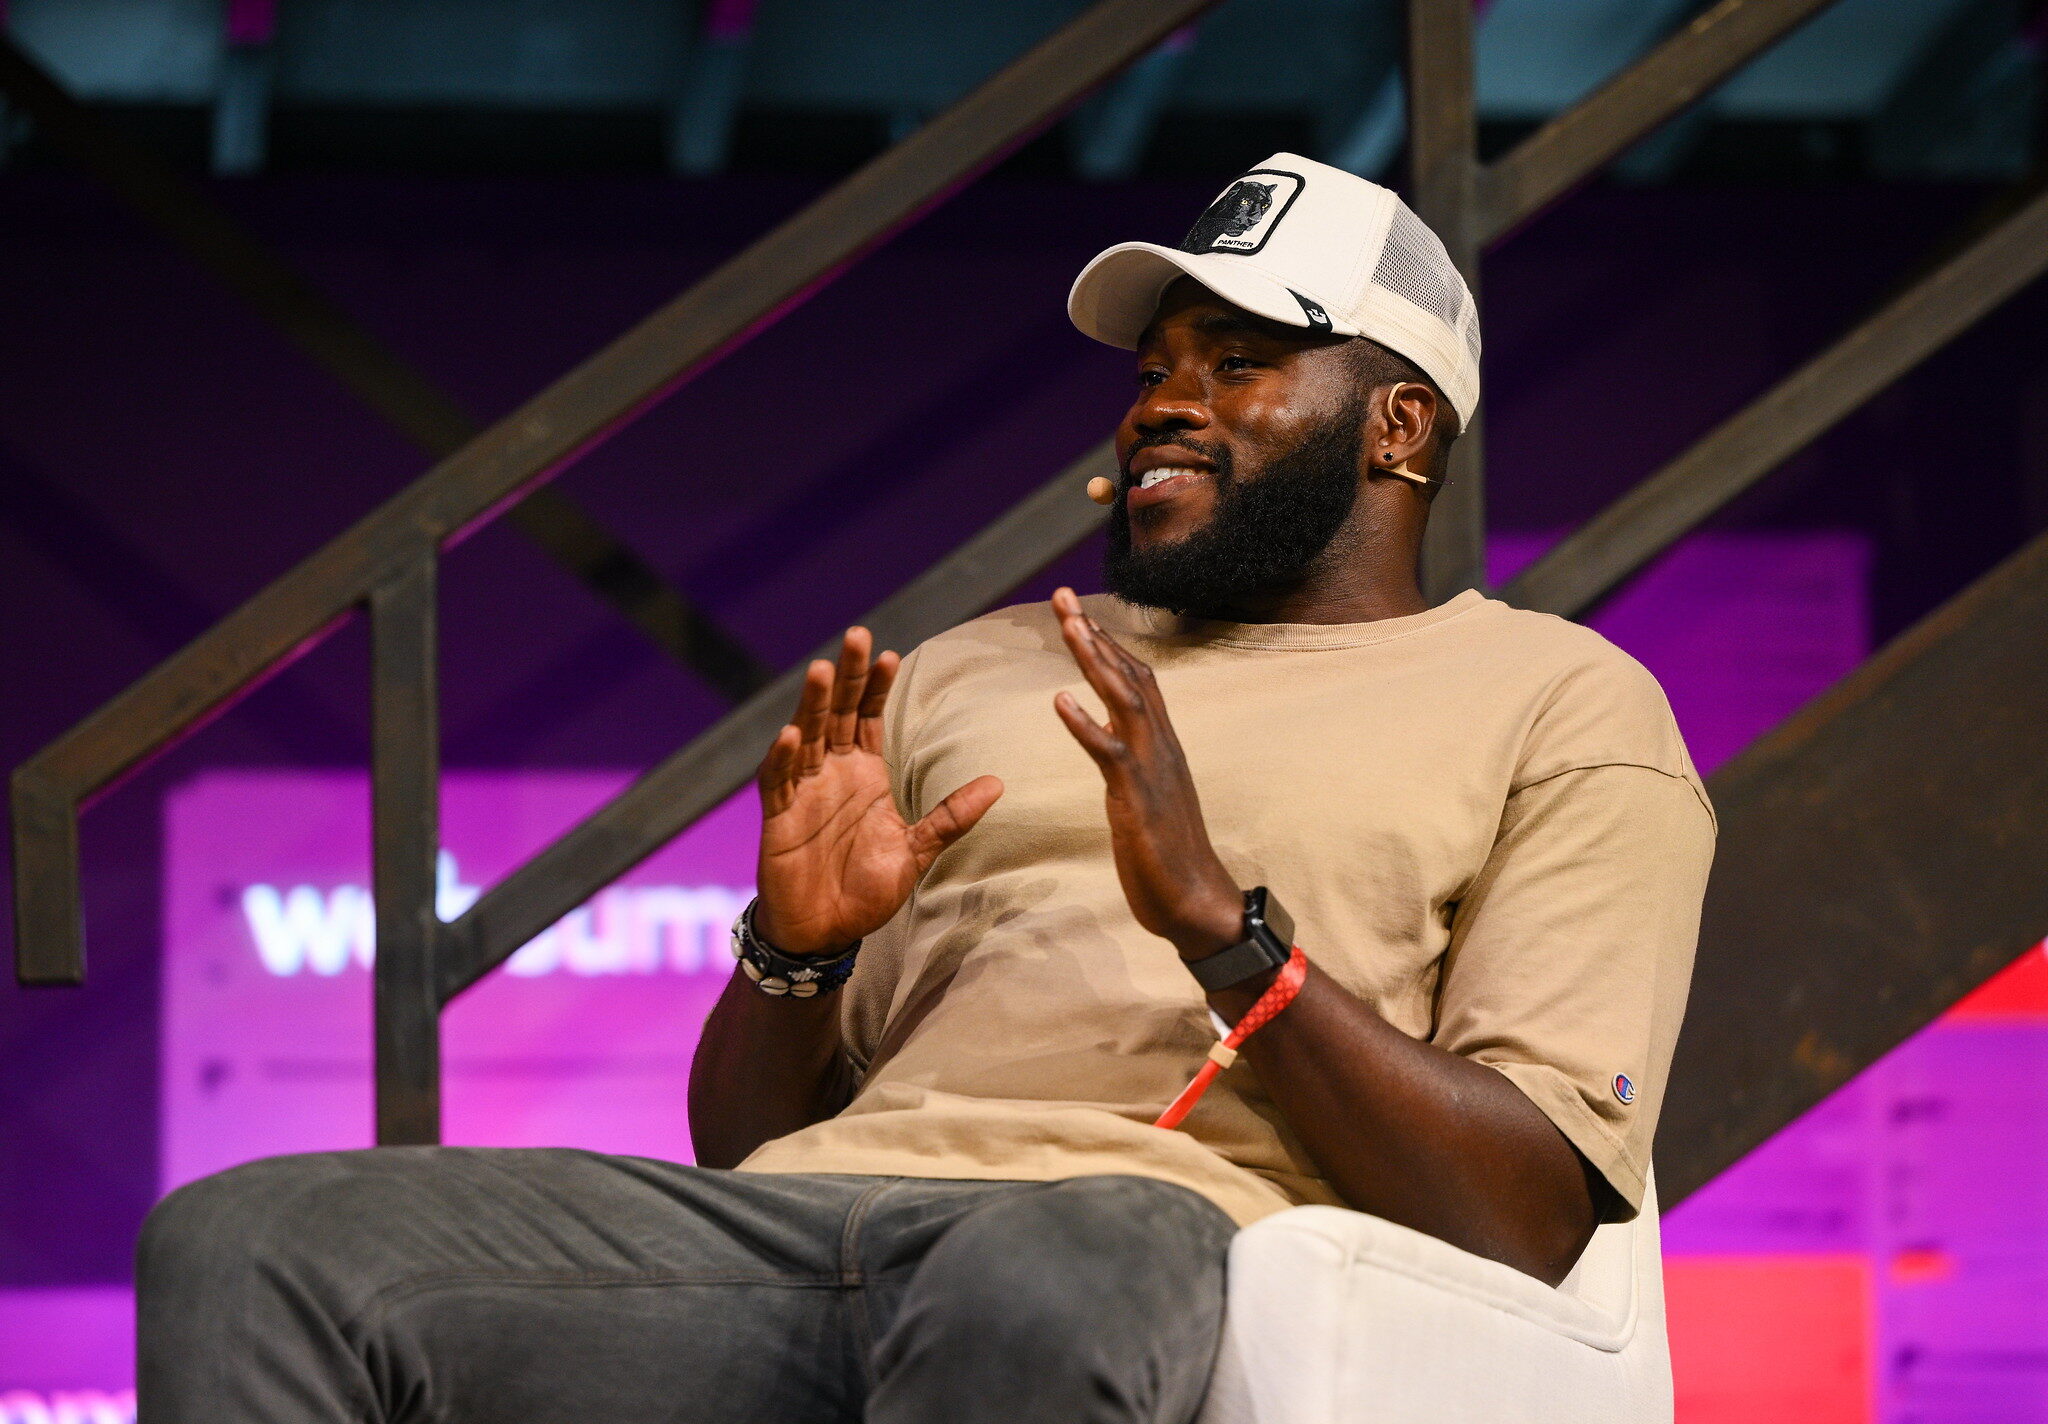 Martins Imhangbe, Actor, Bridgerton on Contentmakers stage during day three of Web Summit 2022 at the Altice Arena in Lisbon, Portugal